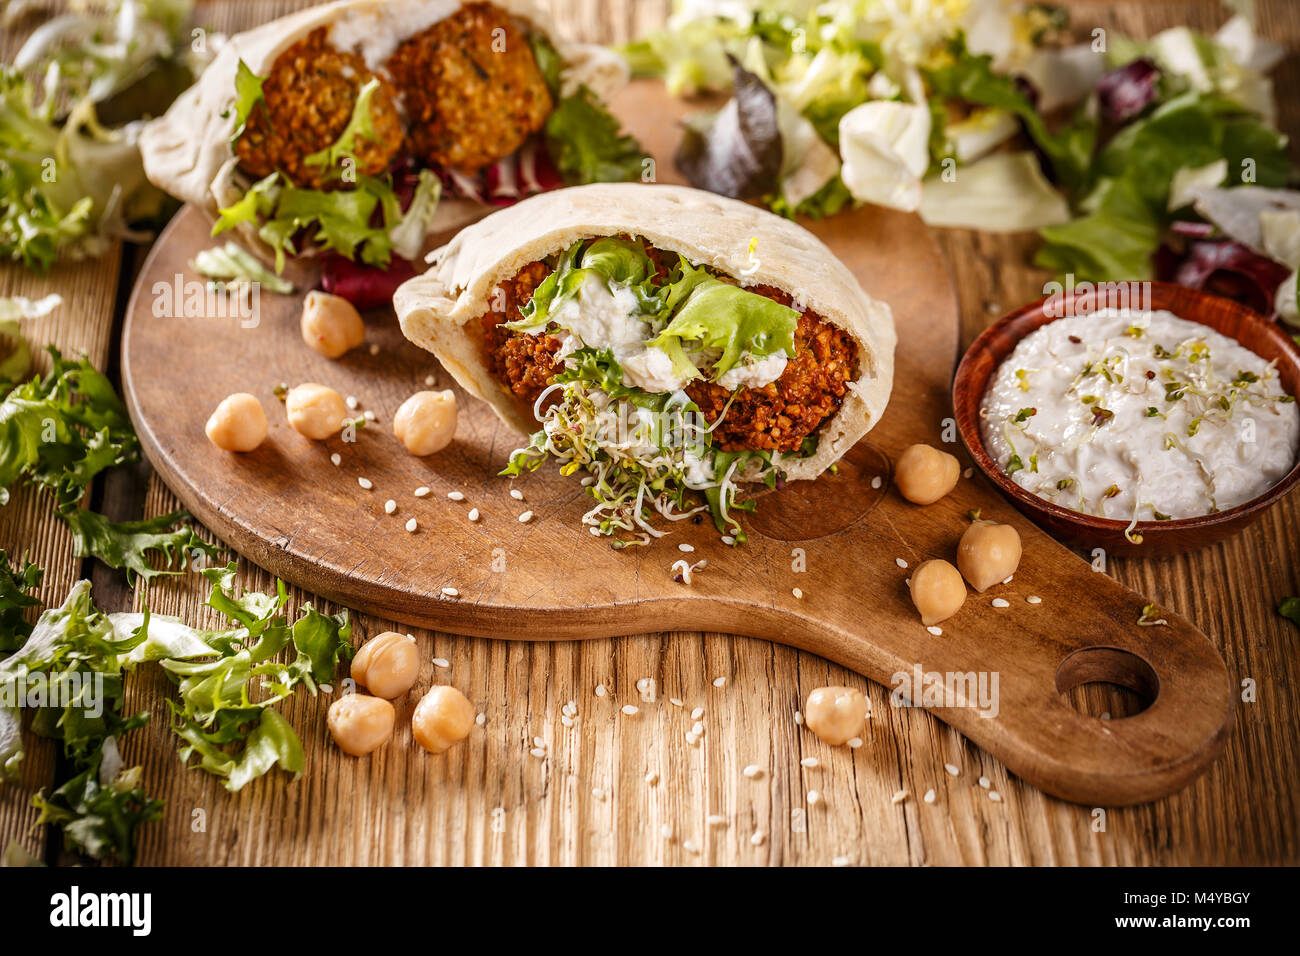 Falafel, middle eastern deep fried chickpea balls in pita bread Stock Photo